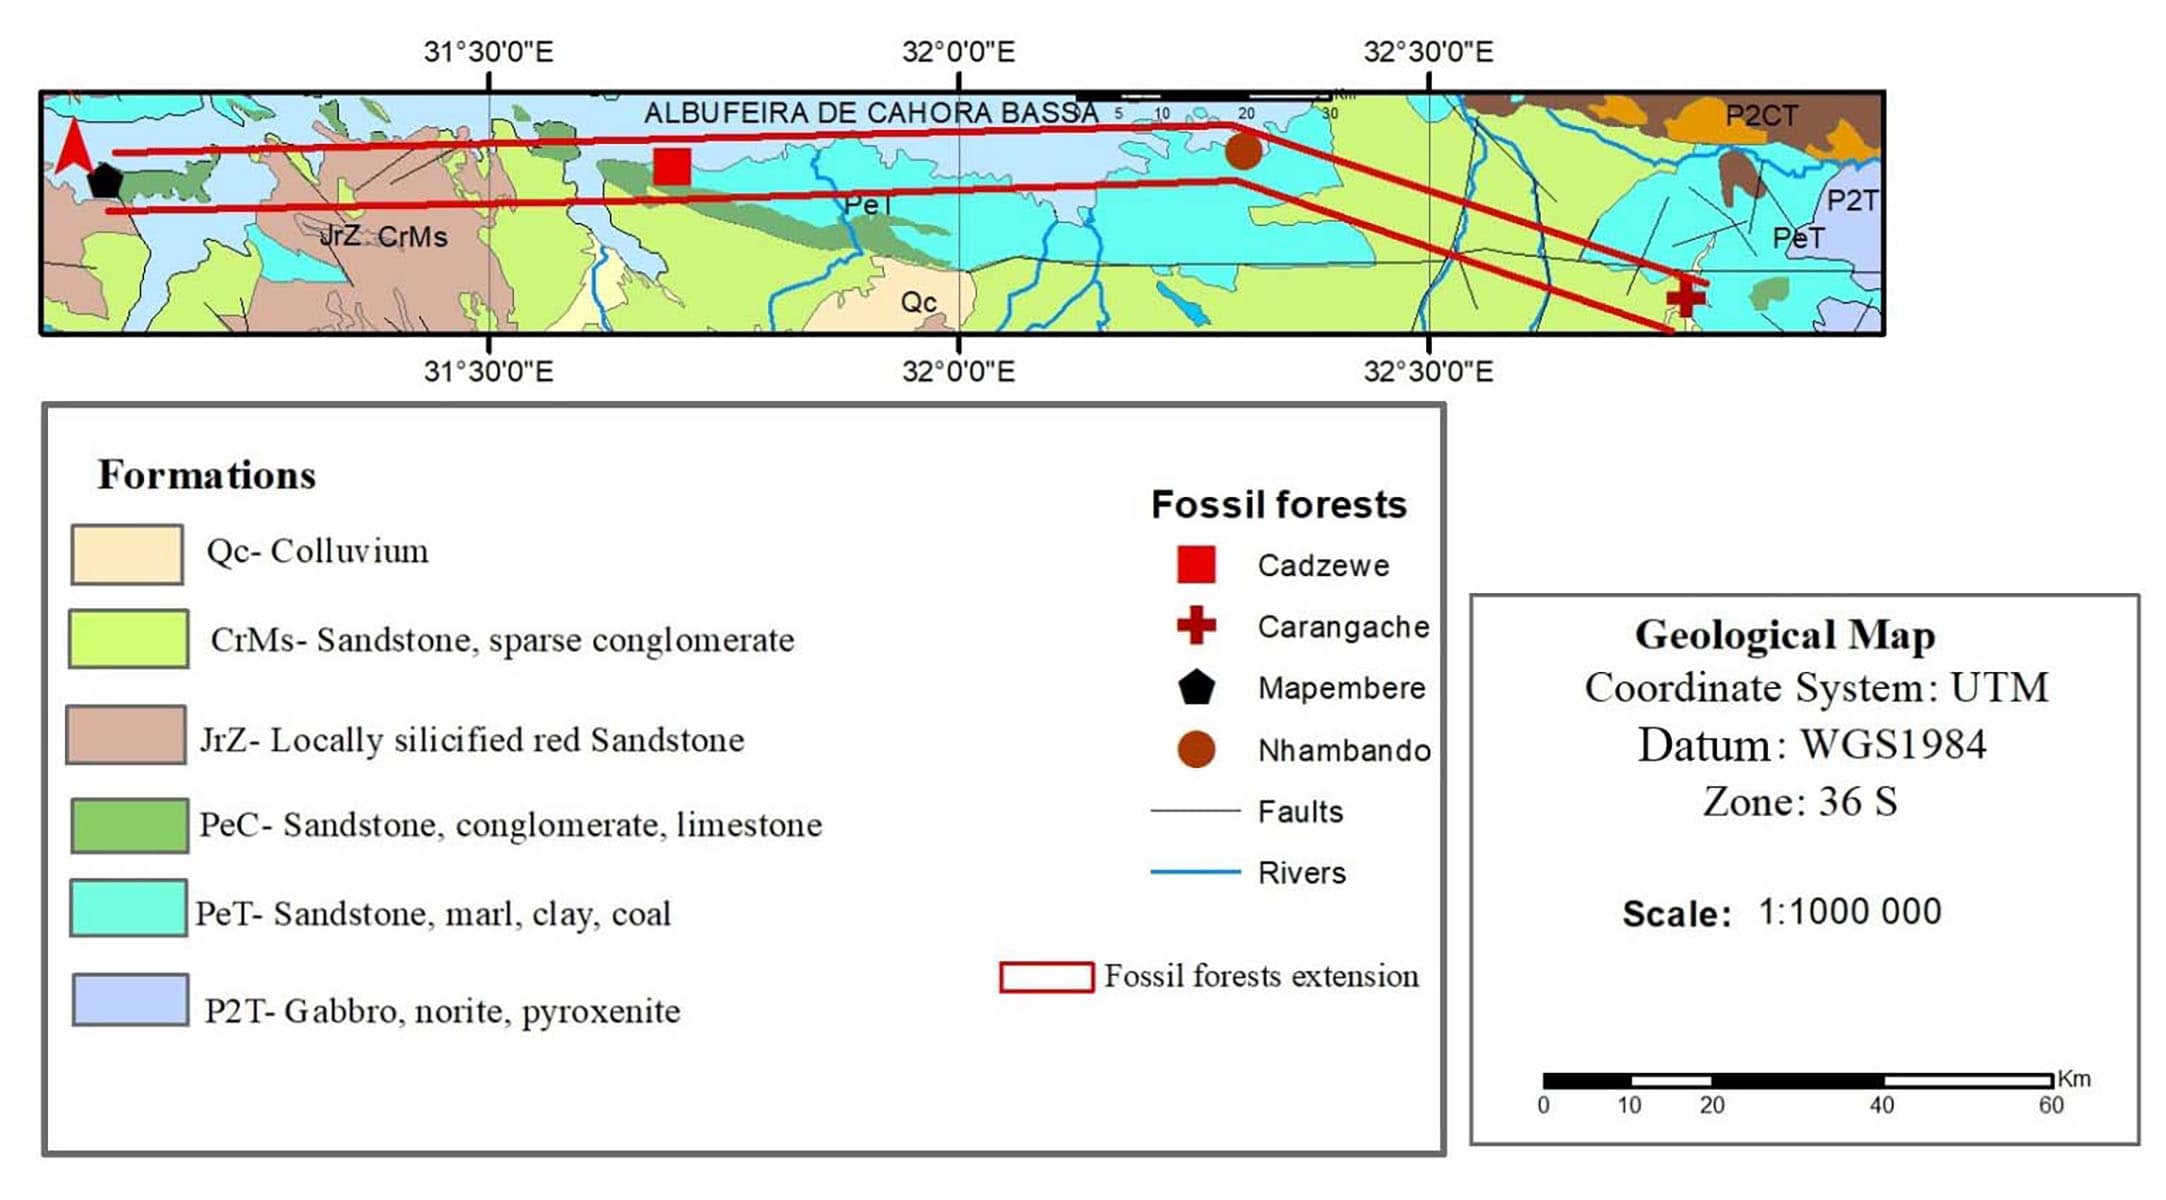 Geological map/diagram of Tete Fossilized Forests